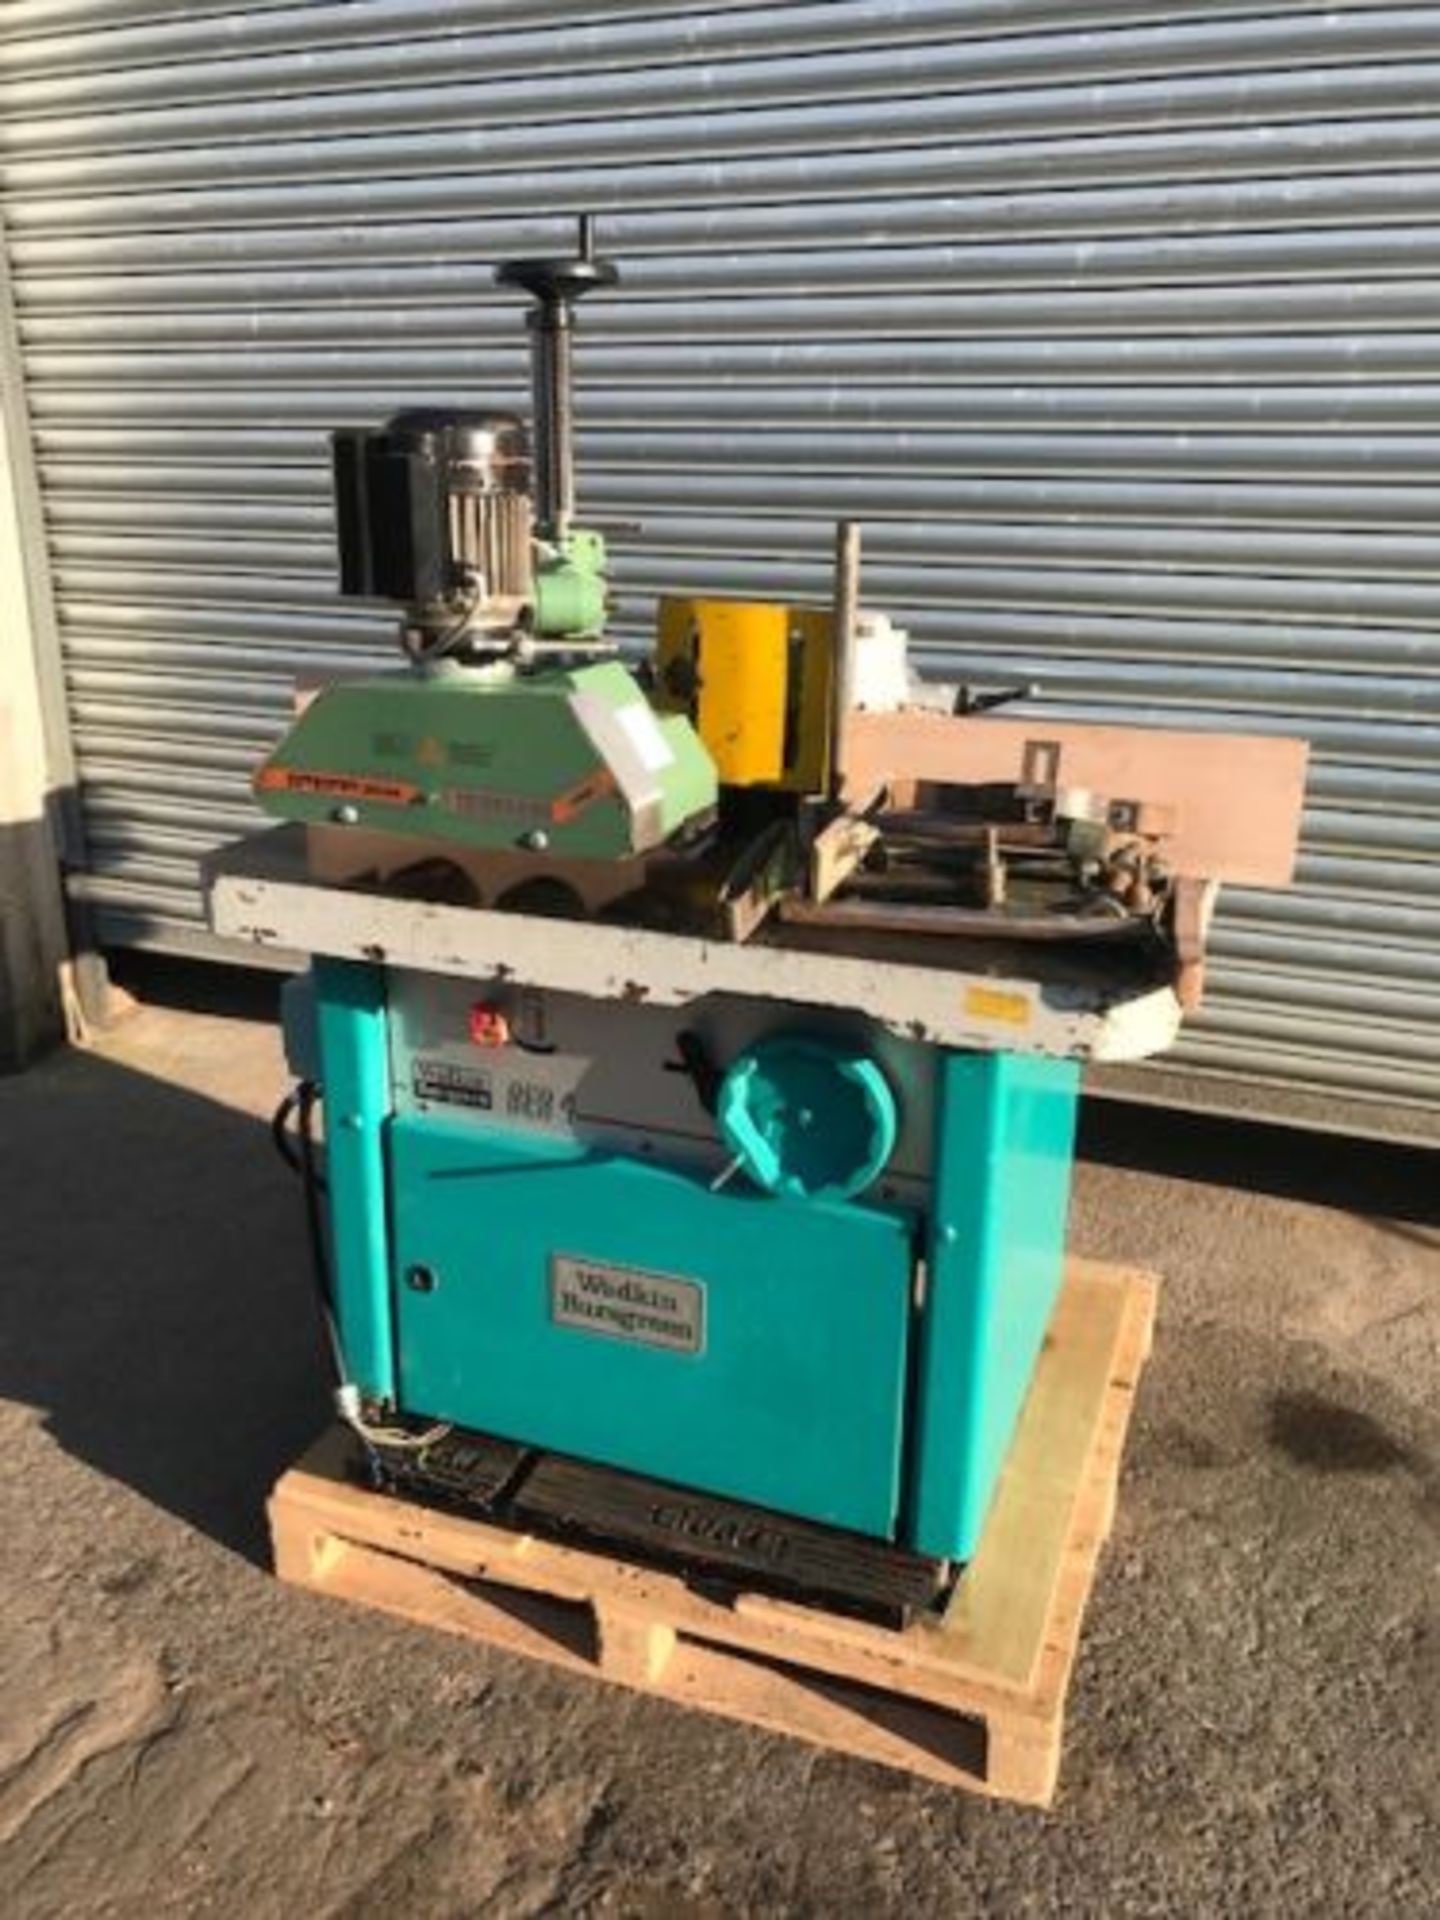 Wadkin BER4 Spindle Moulder with Steff2034 power feed unit foot brake stop